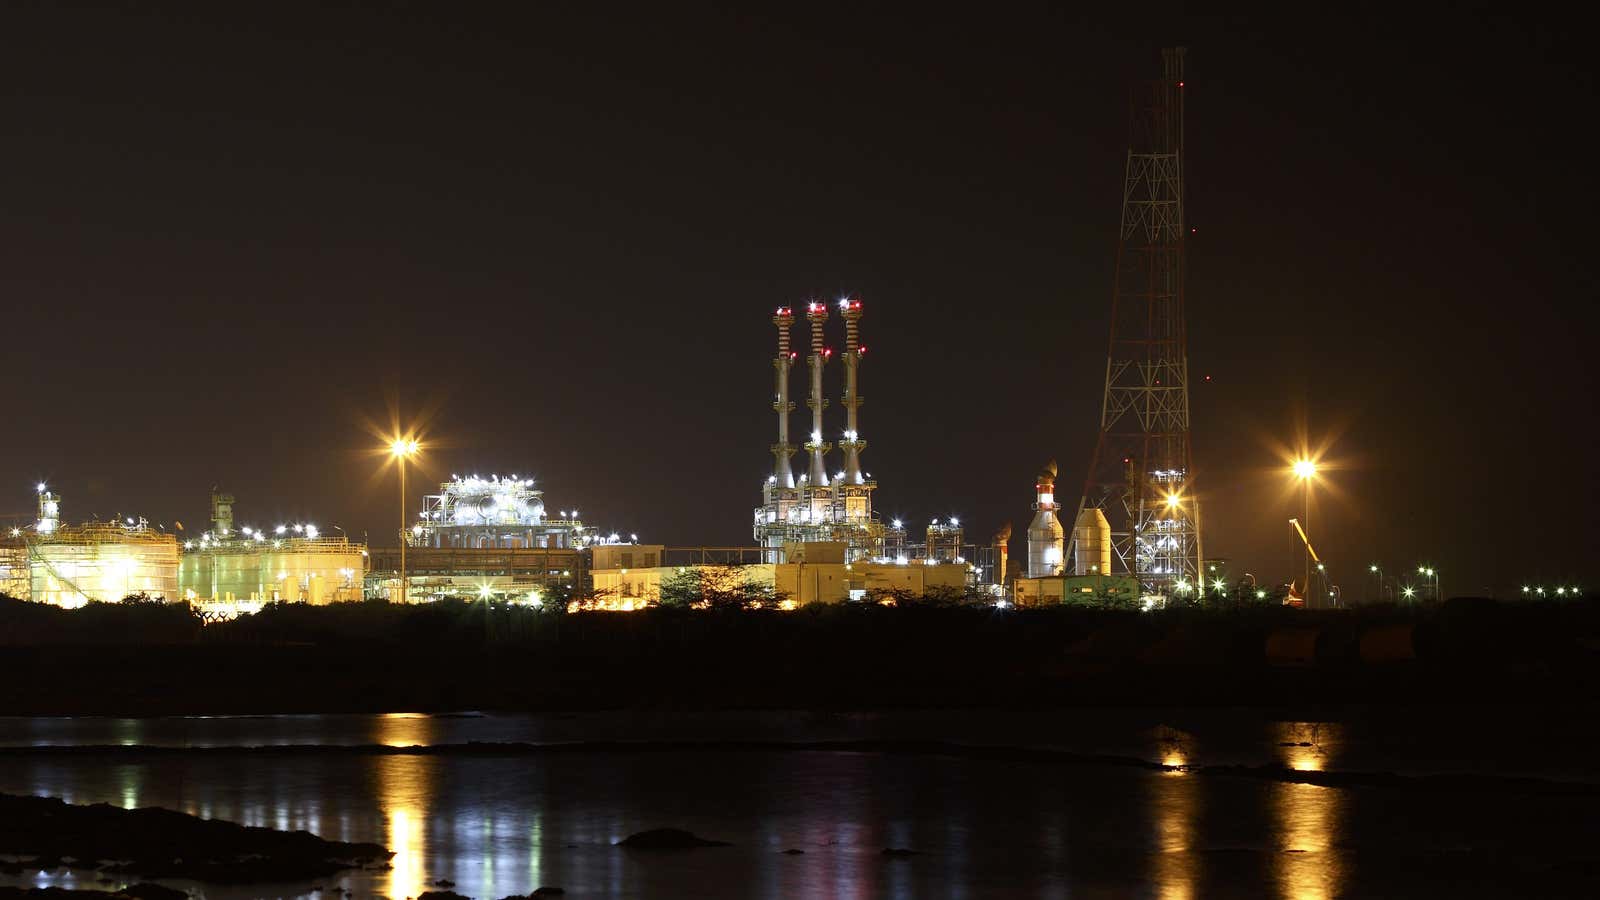 A Reliance Industries crude oil production facility in Andhra Pradesh, India